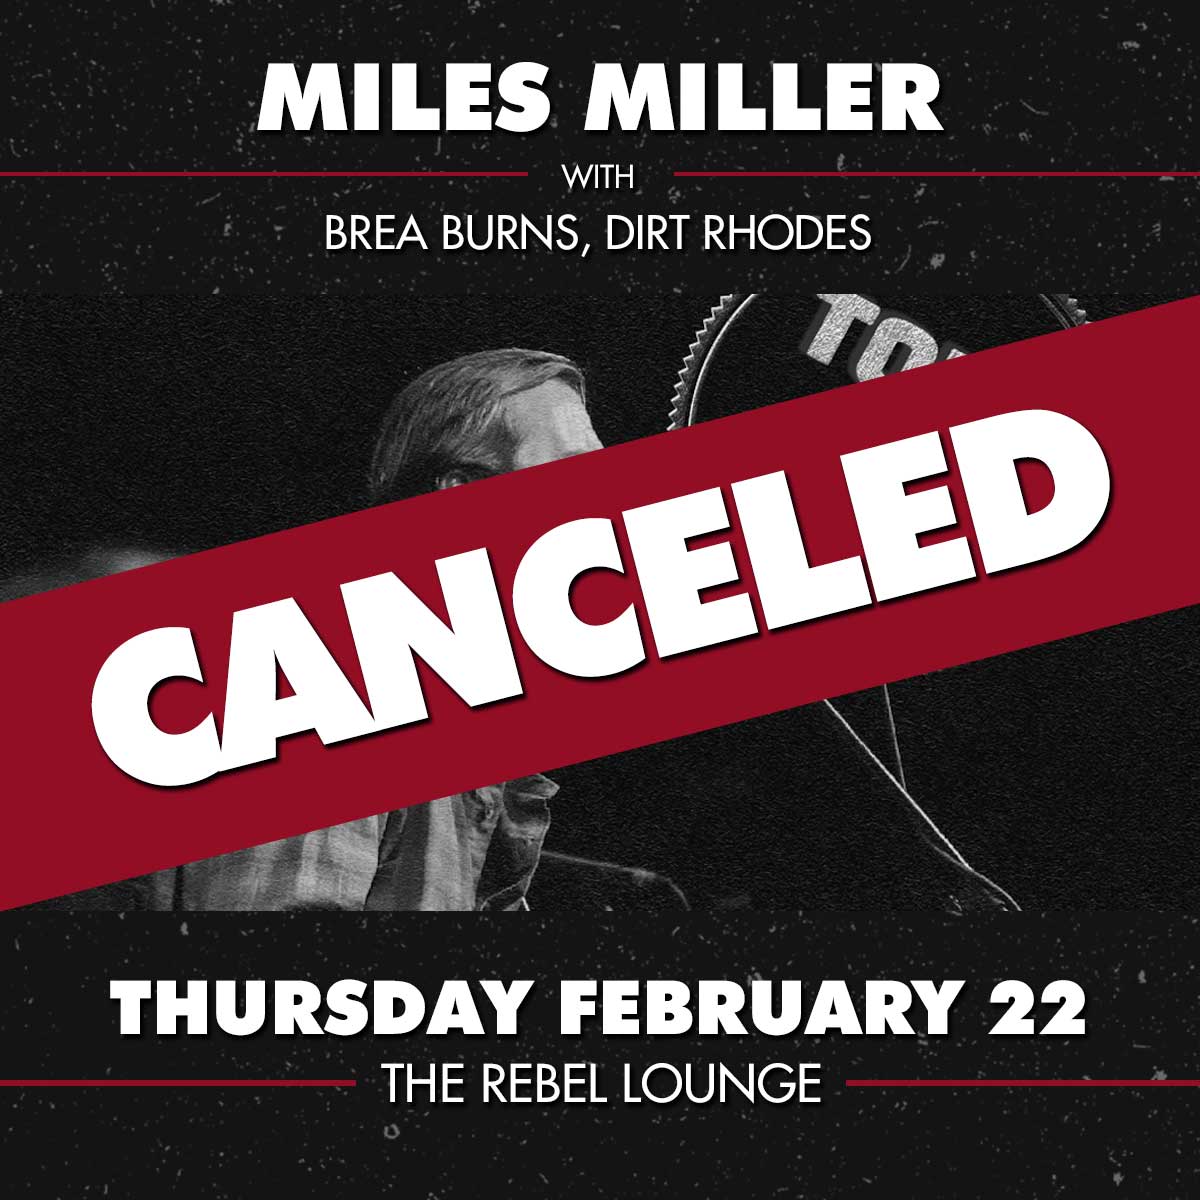 MILES MILLER - CANCELLED